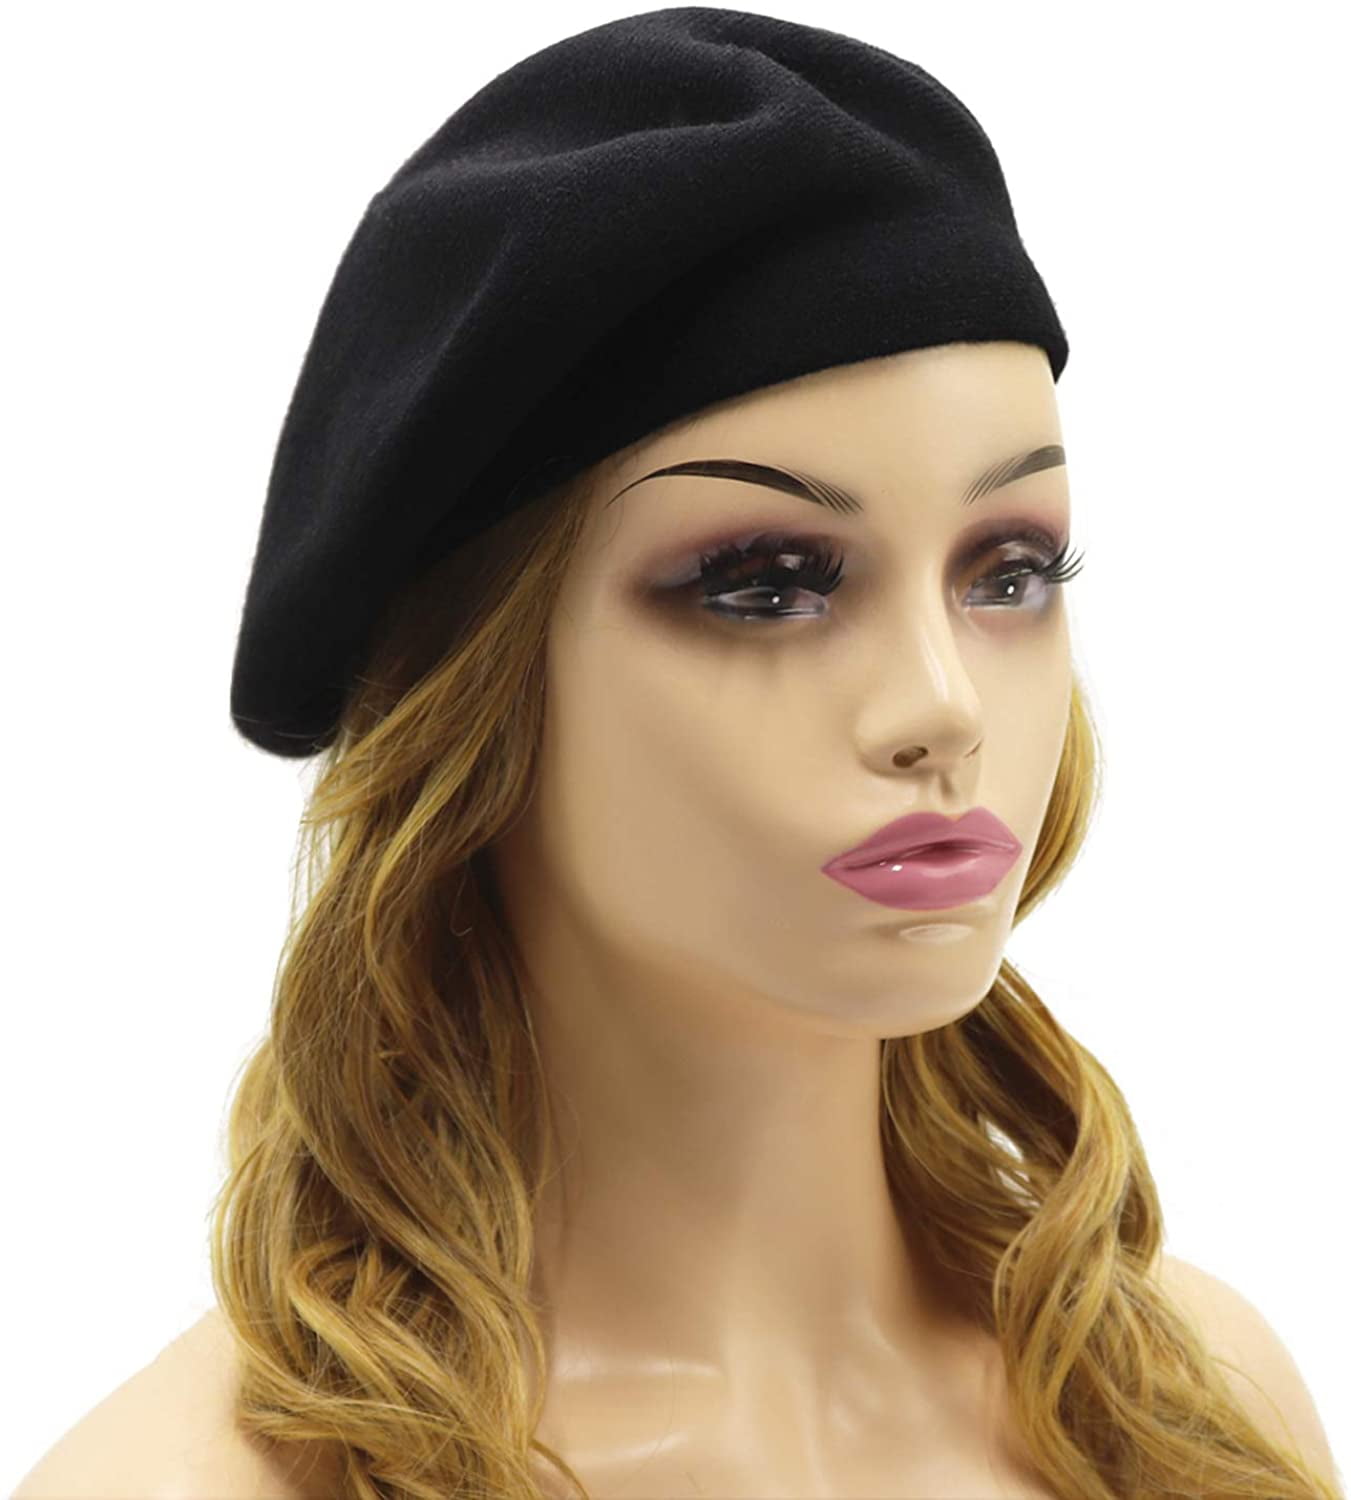 Wheebo French Beret Hat,Reversible Solid Color Cashmere Beret Cap for Womens Girls Lady Adults 